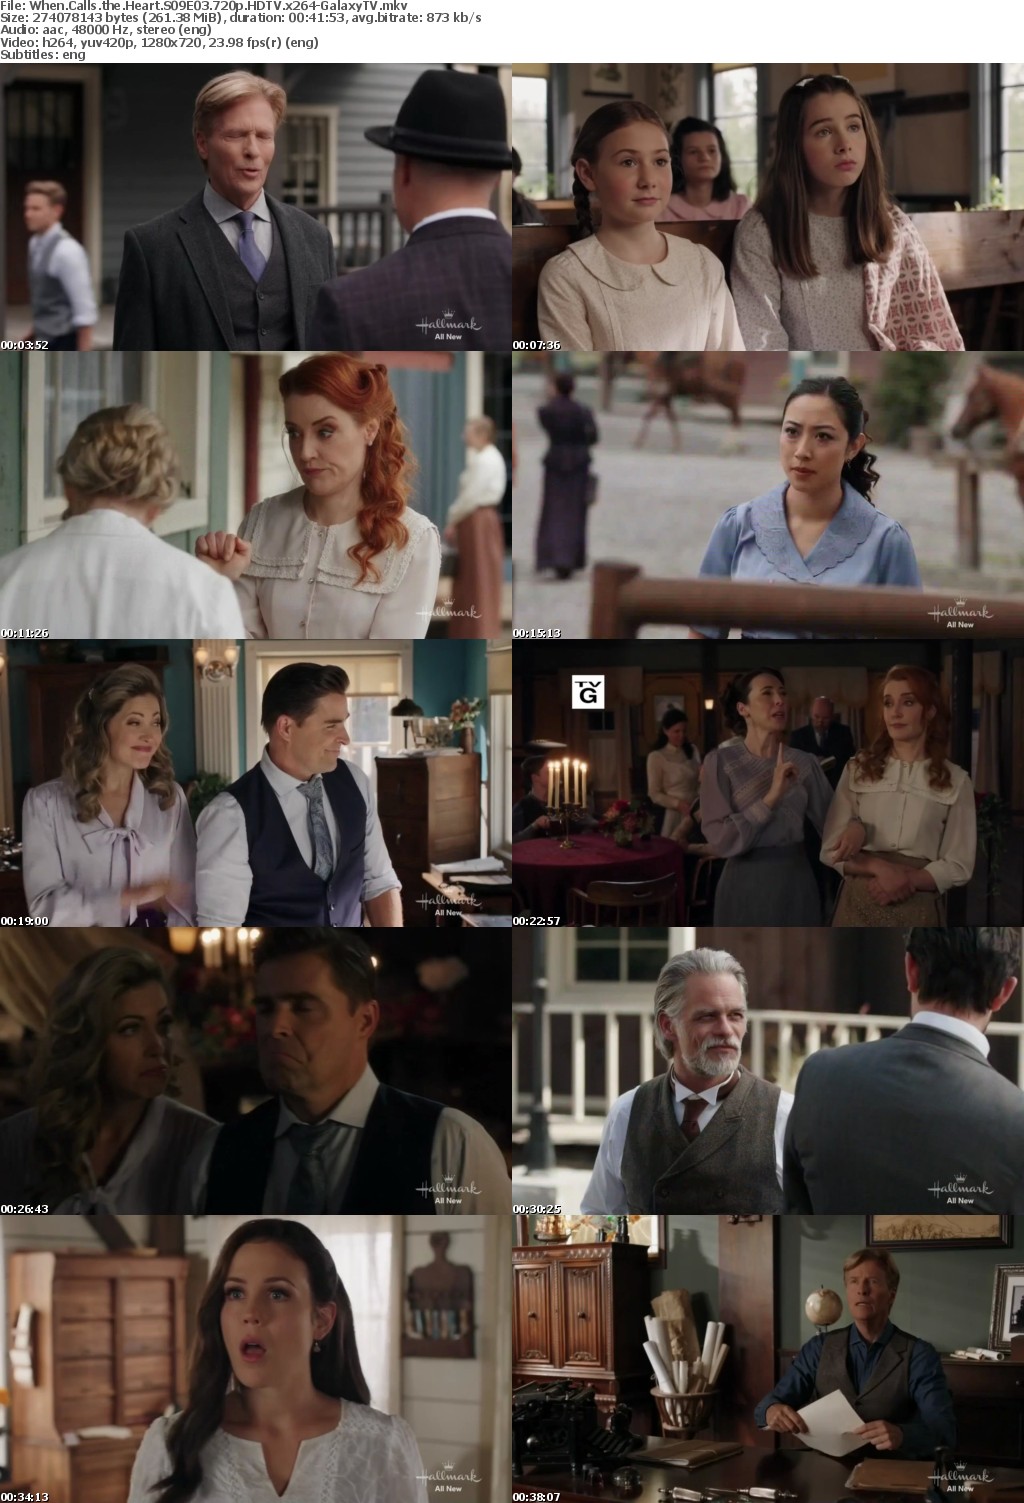 When Calls the Heart S09 COMPLETE 720p HDTV x264-GalaxyTV